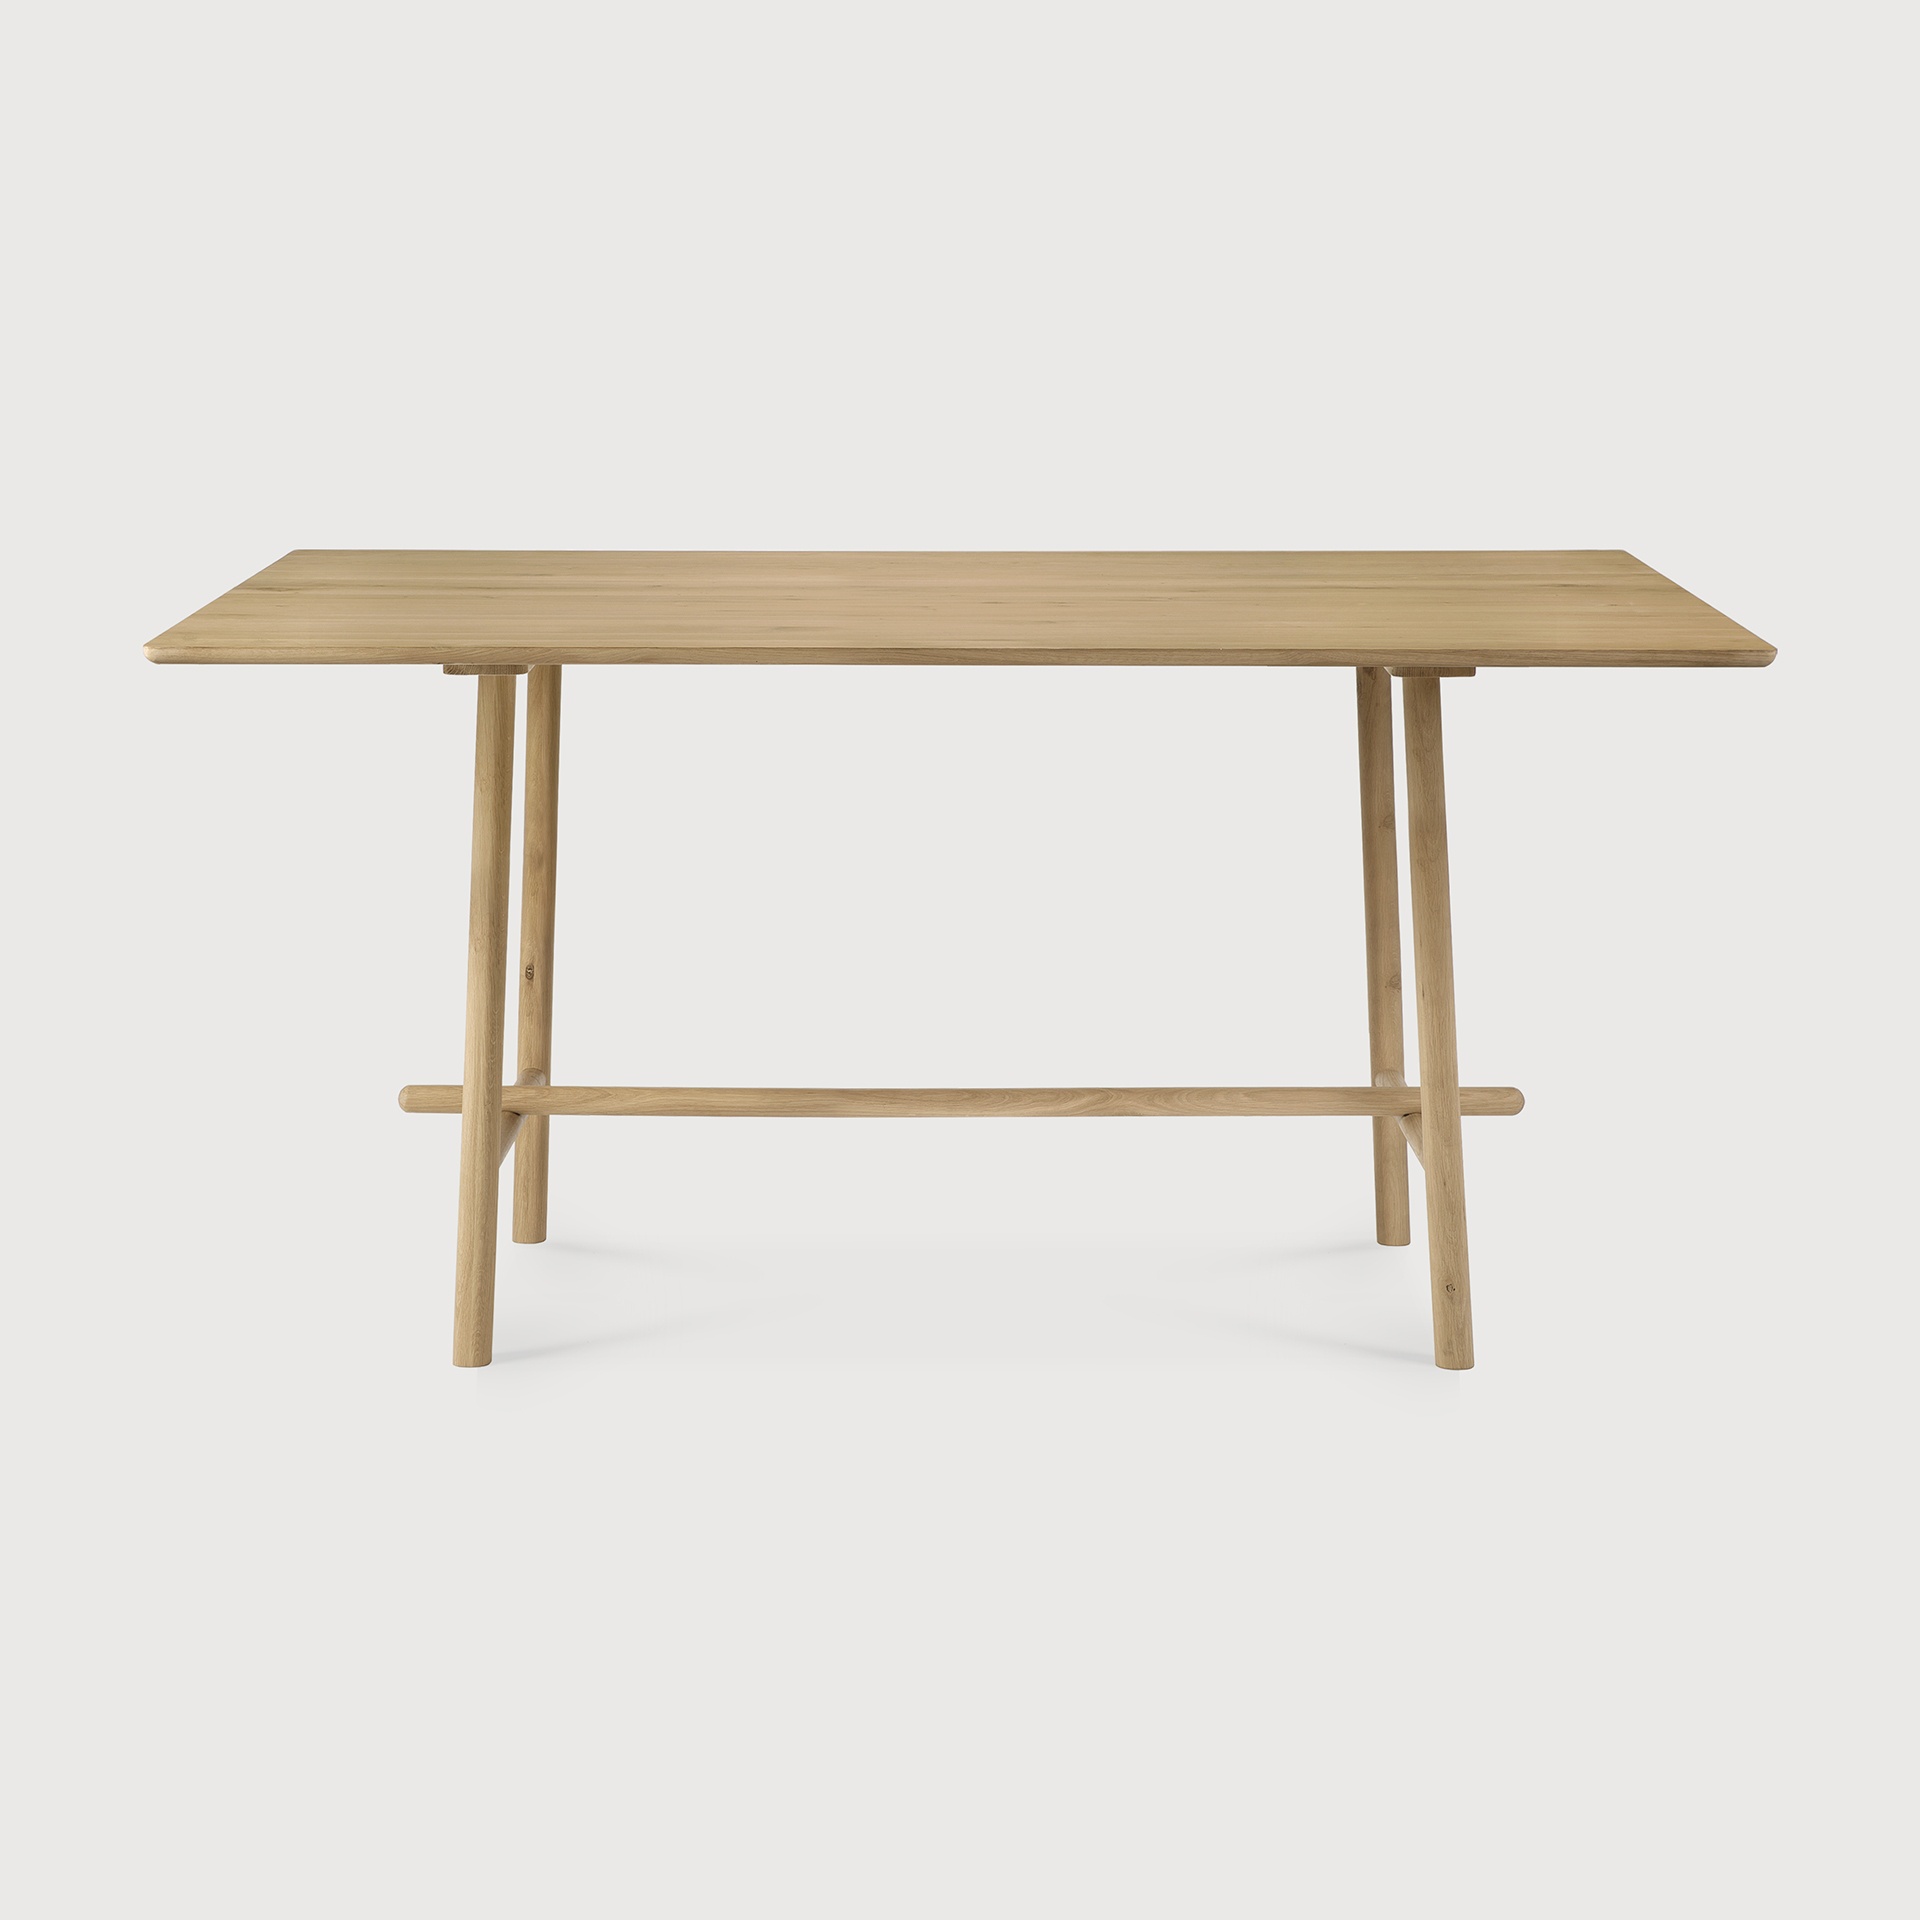 [50006] Profile high meeting table 